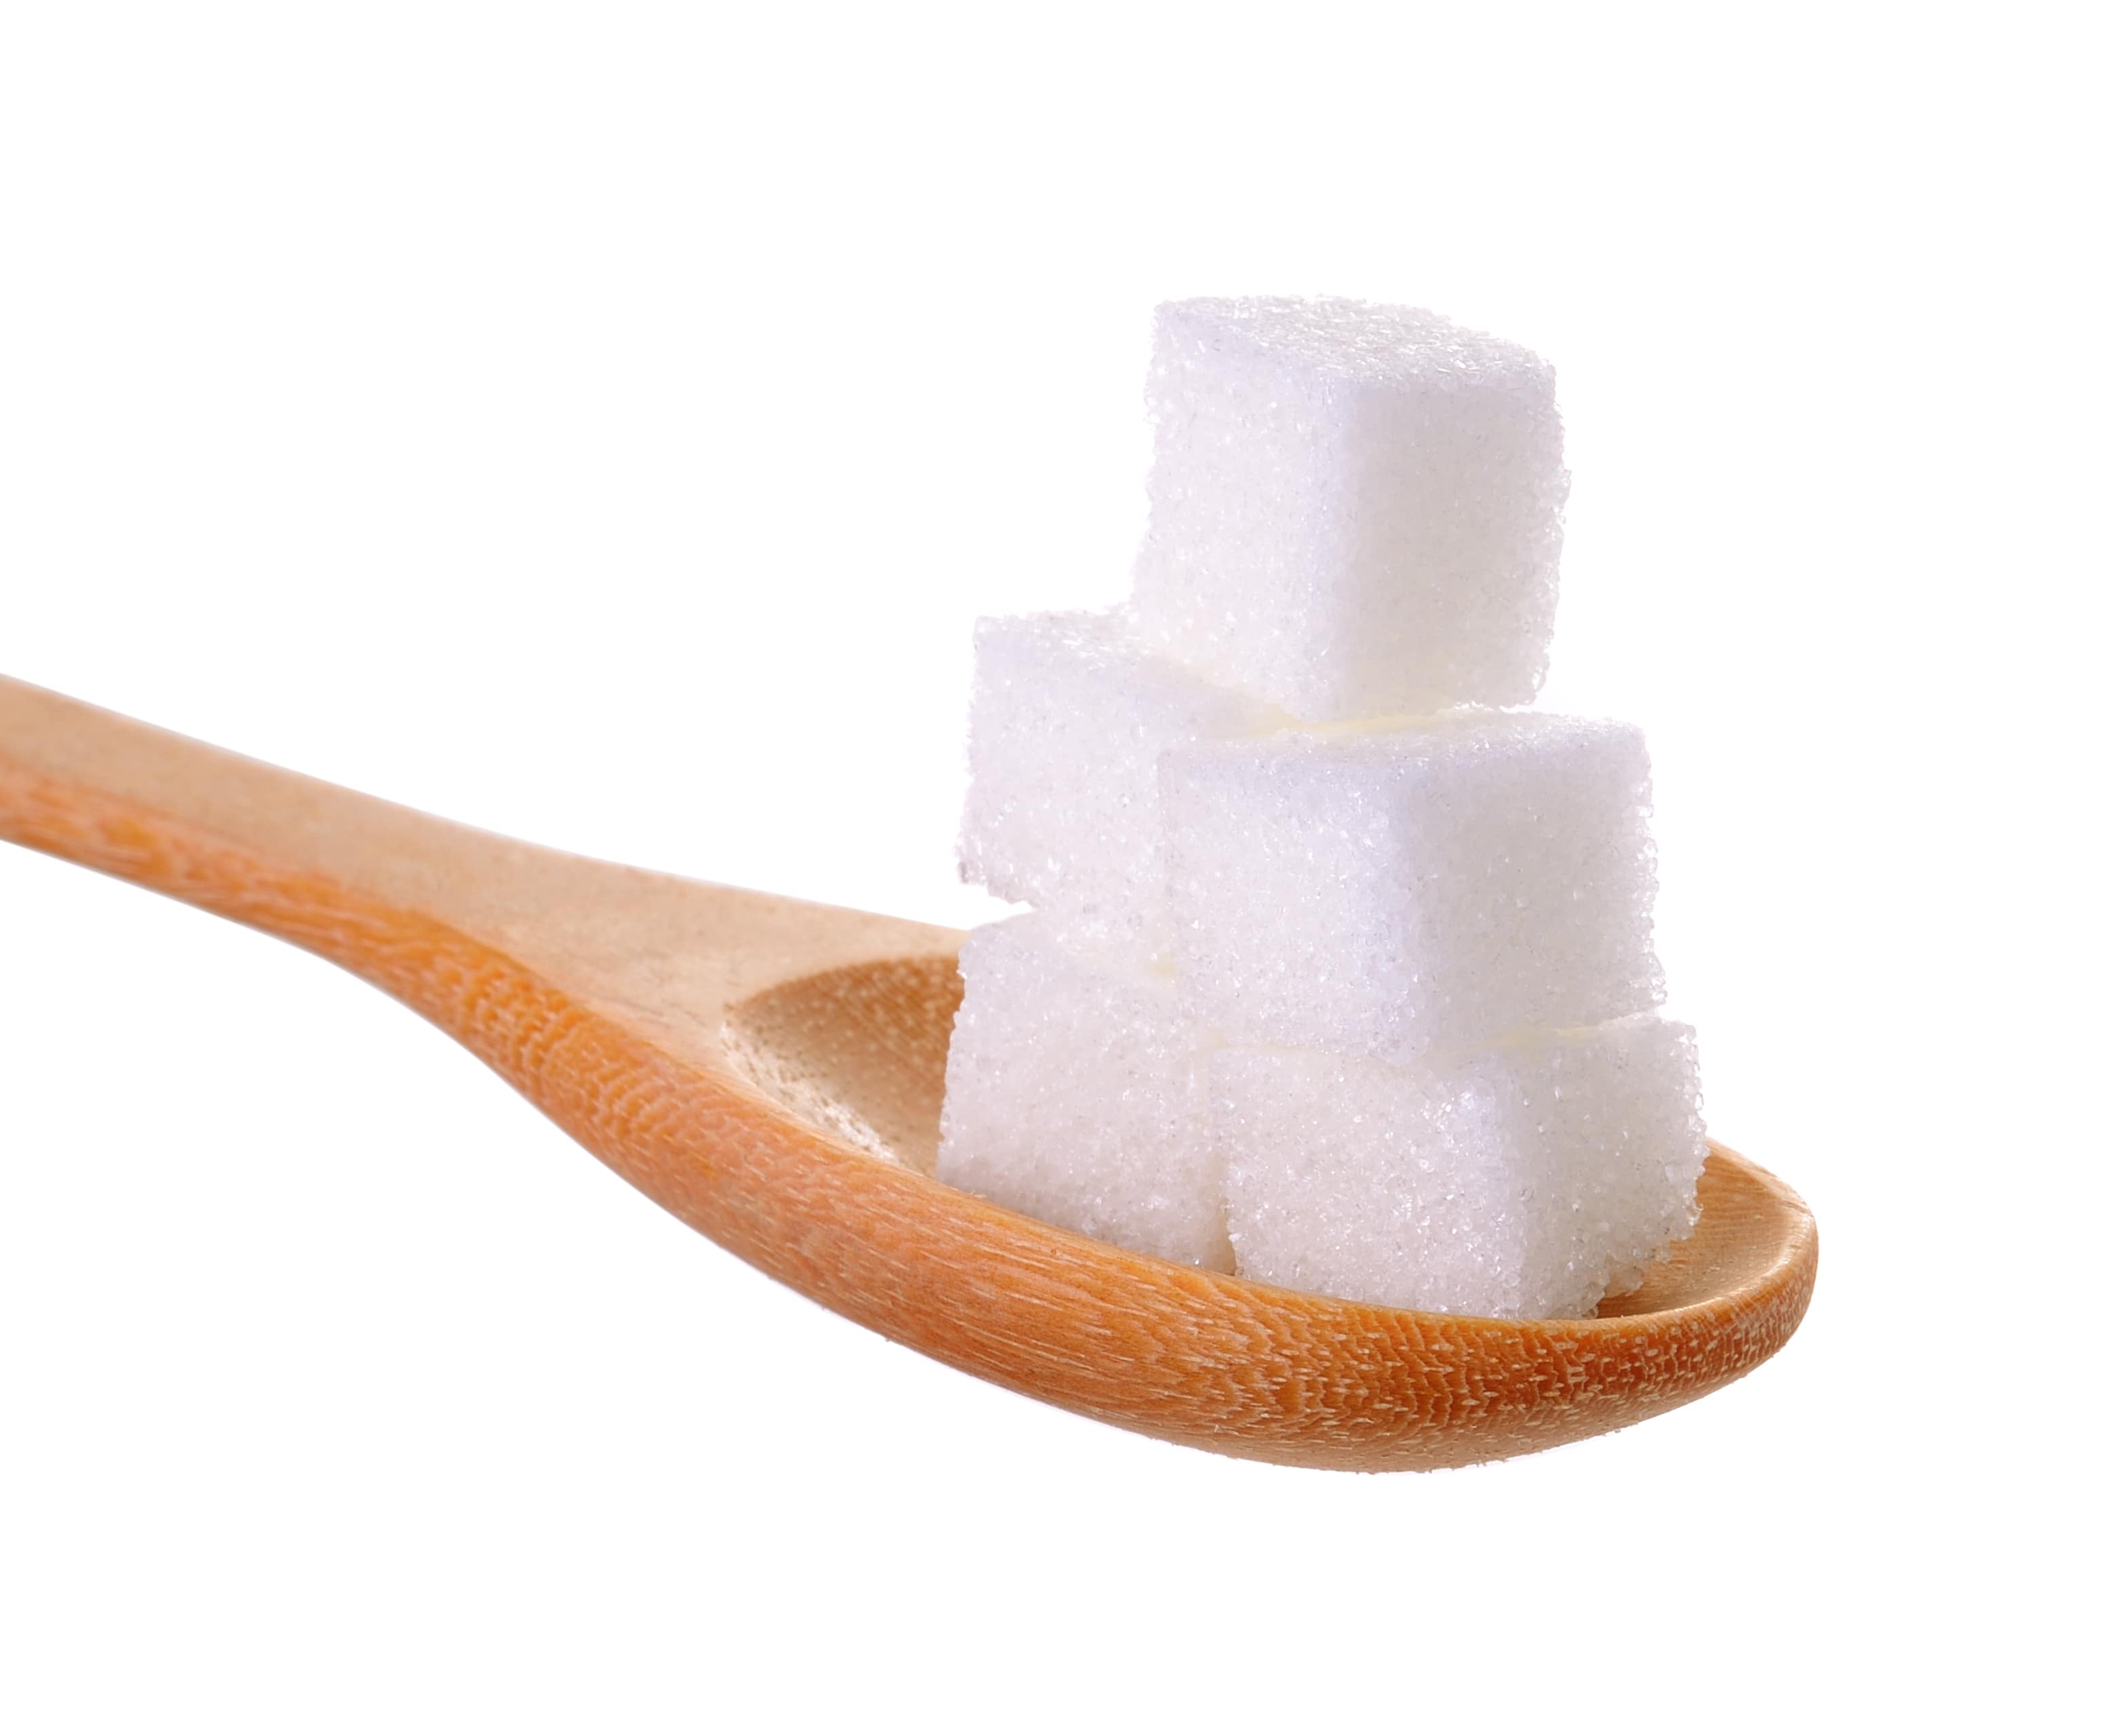 Sugars Are Not Created Equally